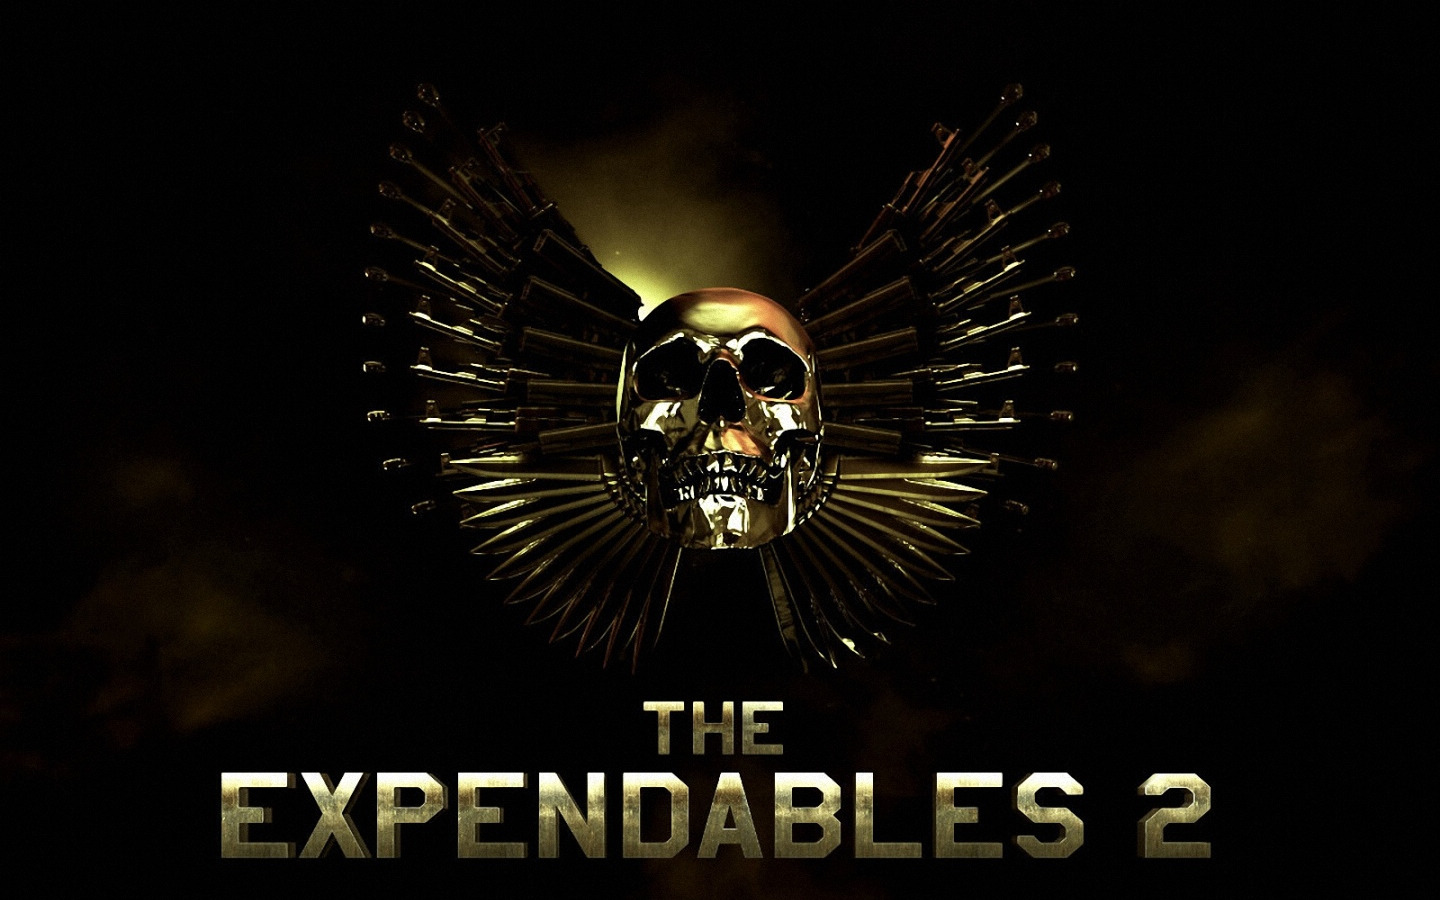 The Expendables Desktop Pc And Mac Wallpaper